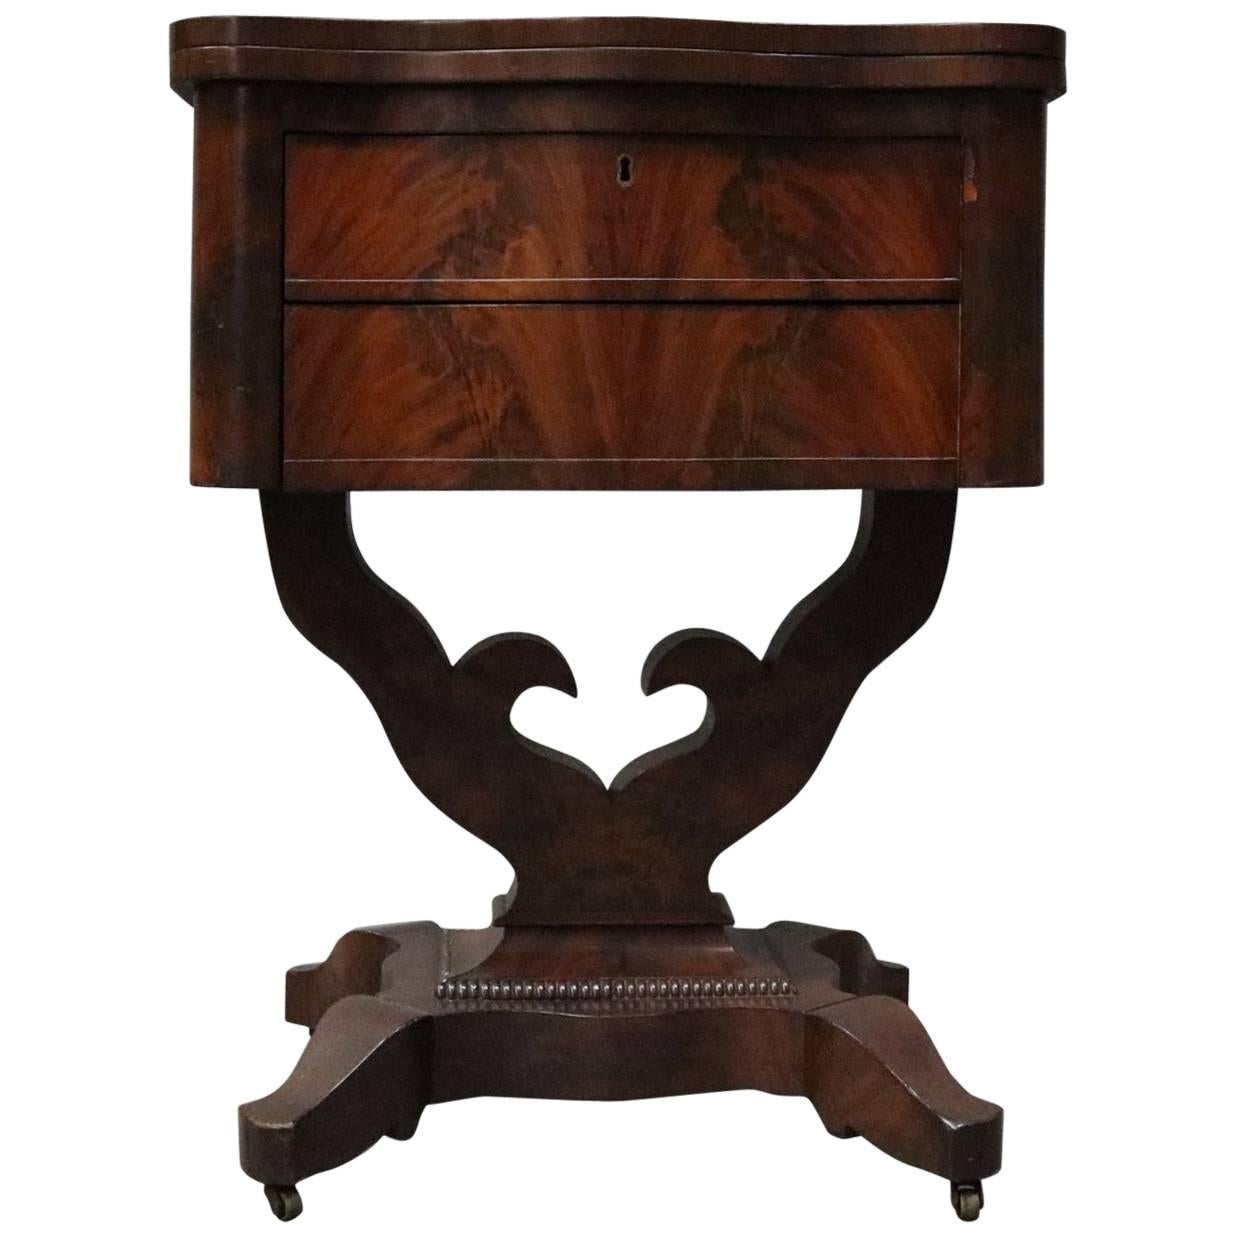 Antique Flame Mahogany Front Two-Drawer Flip-Top Sewing Stand, circa 1880